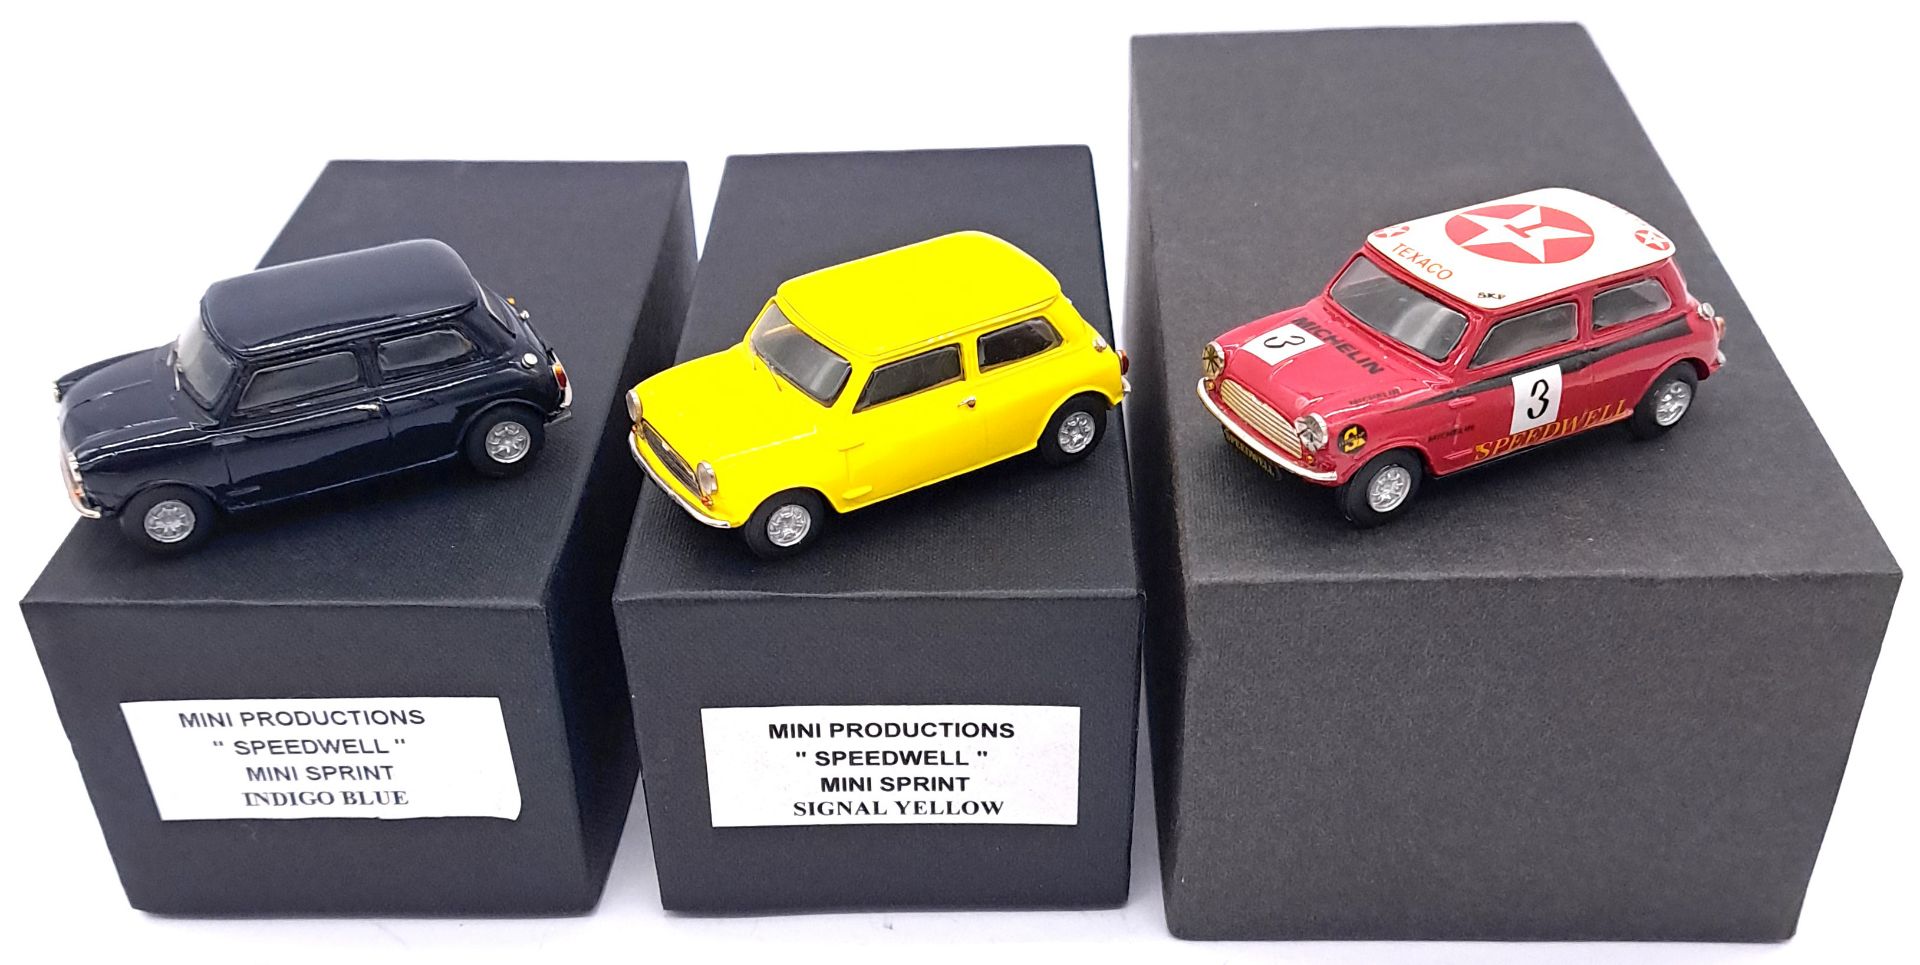 Mini Productions, a boxed group of white metal Mini models